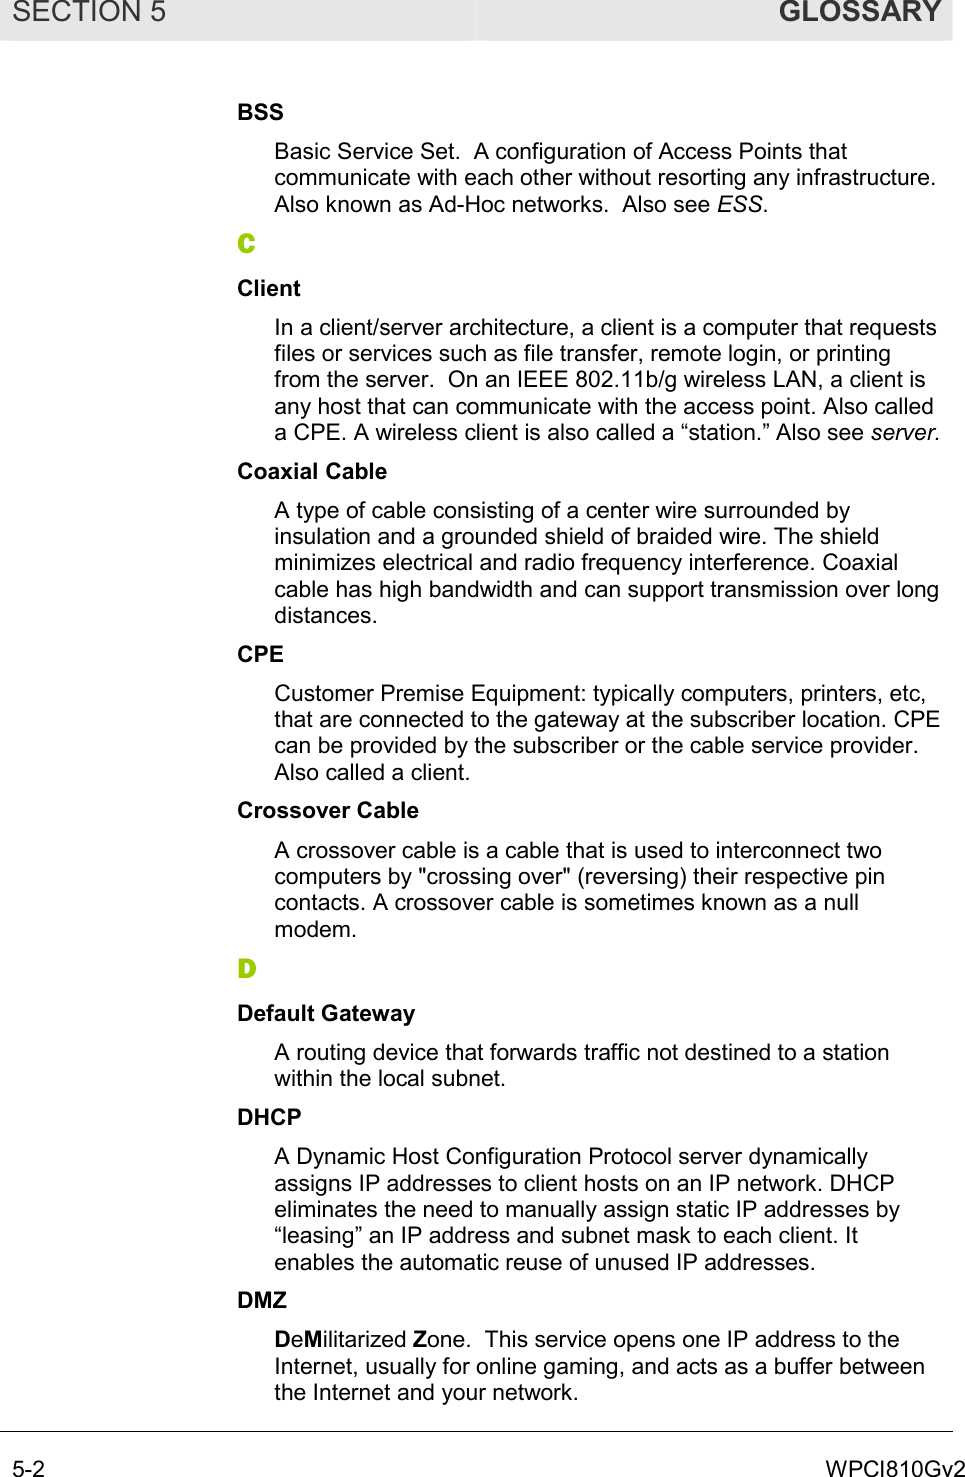 SECTION 5  GLOSSARY 5-2  WPCI810Gv2 BSS Basic Service Set.  A configuration of Access Points that communicate with each other without resorting any infrastructure. Also known as Ad-Hoc networks.  Also see ESS. C Client In a client/server architecture, a client is a computer that requests files or services such as file transfer, remote login, or printing from the server.  On an IEEE 802.11b/g wireless LAN, a client is any host that can communicate with the access point. Also called a CPE. A wireless client is also called a “station.” Also see server. Coaxial Cable A type of cable consisting of a center wire surrounded by insulation and a grounded shield of braided wire. The shield minimizes electrical and radio frequency interference. Coaxial cable has high bandwidth and can support transmission over long distances. CPE Customer Premise Equipment: typically computers, printers, etc, that are connected to the gateway at the subscriber location. CPE can be provided by the subscriber or the cable service provider. Also called a client. Crossover Cable A crossover cable is a cable that is used to interconnect two computers by &quot;crossing over&quot; (reversing) their respective pin contacts. A crossover cable is sometimes known as a null modem.  D Default Gateway A routing device that forwards traffic not destined to a station within the local subnet. DHCP A Dynamic Host Configuration Protocol server dynamically assigns IP addresses to client hosts on an IP network. DHCP eliminates the need to manually assign static IP addresses by “leasing” an IP address and subnet mask to each client. It enables the automatic reuse of unused IP addresses. DMZ DeMilitarized Zone.  This service opens one IP address to the Internet, usually for online gaming, and acts as a buffer between the Internet and your network. 